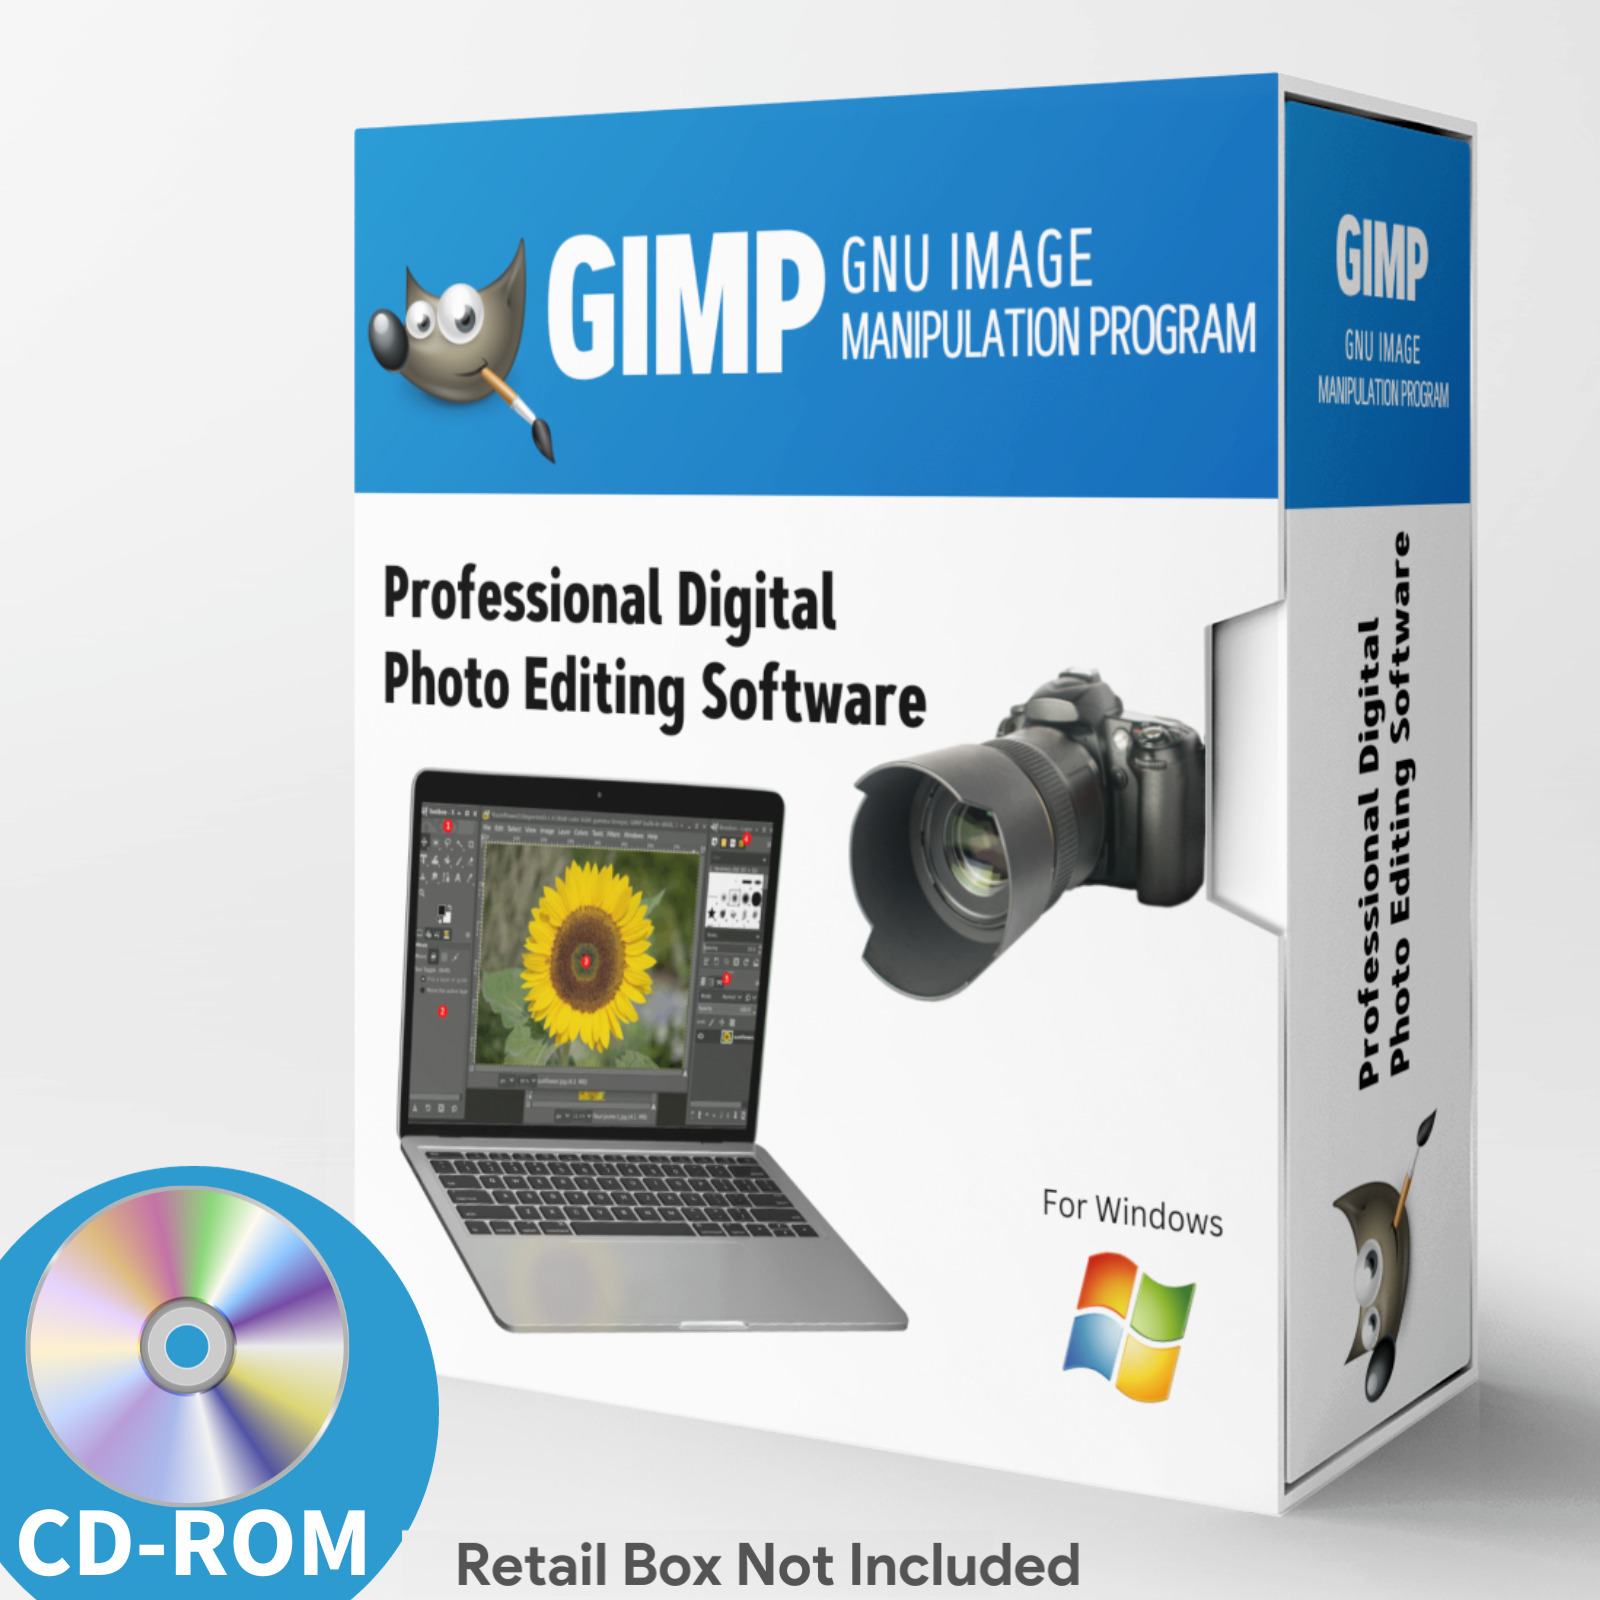 NEW PRO Photo Graphic Design Image Editing Software-GIMP w/ Photo shop Guide CD